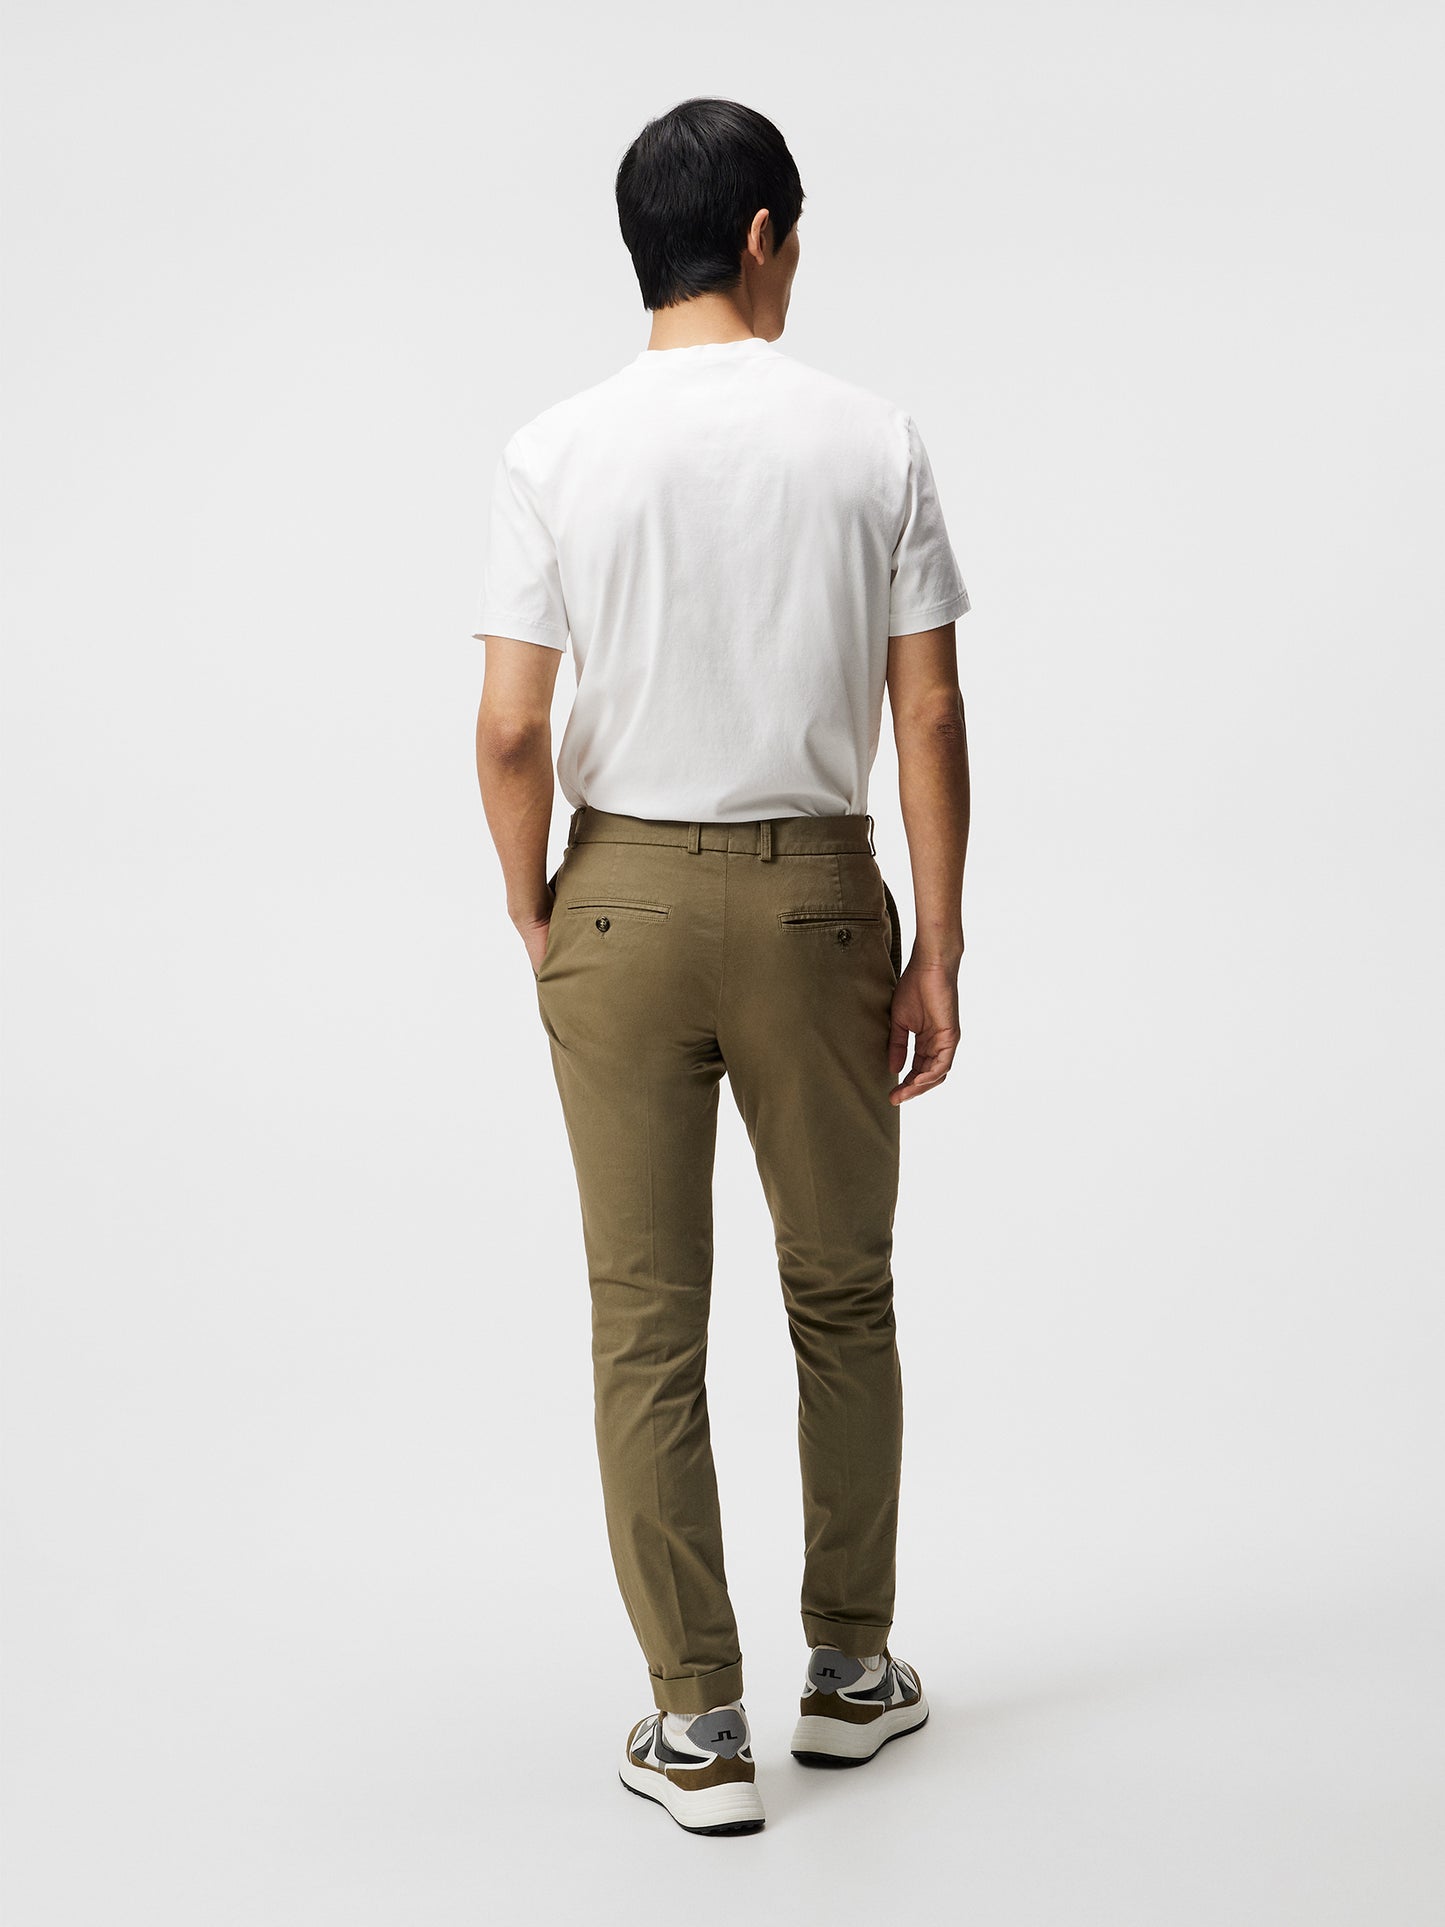 Grant Gmt Dyed Pants / Aloe